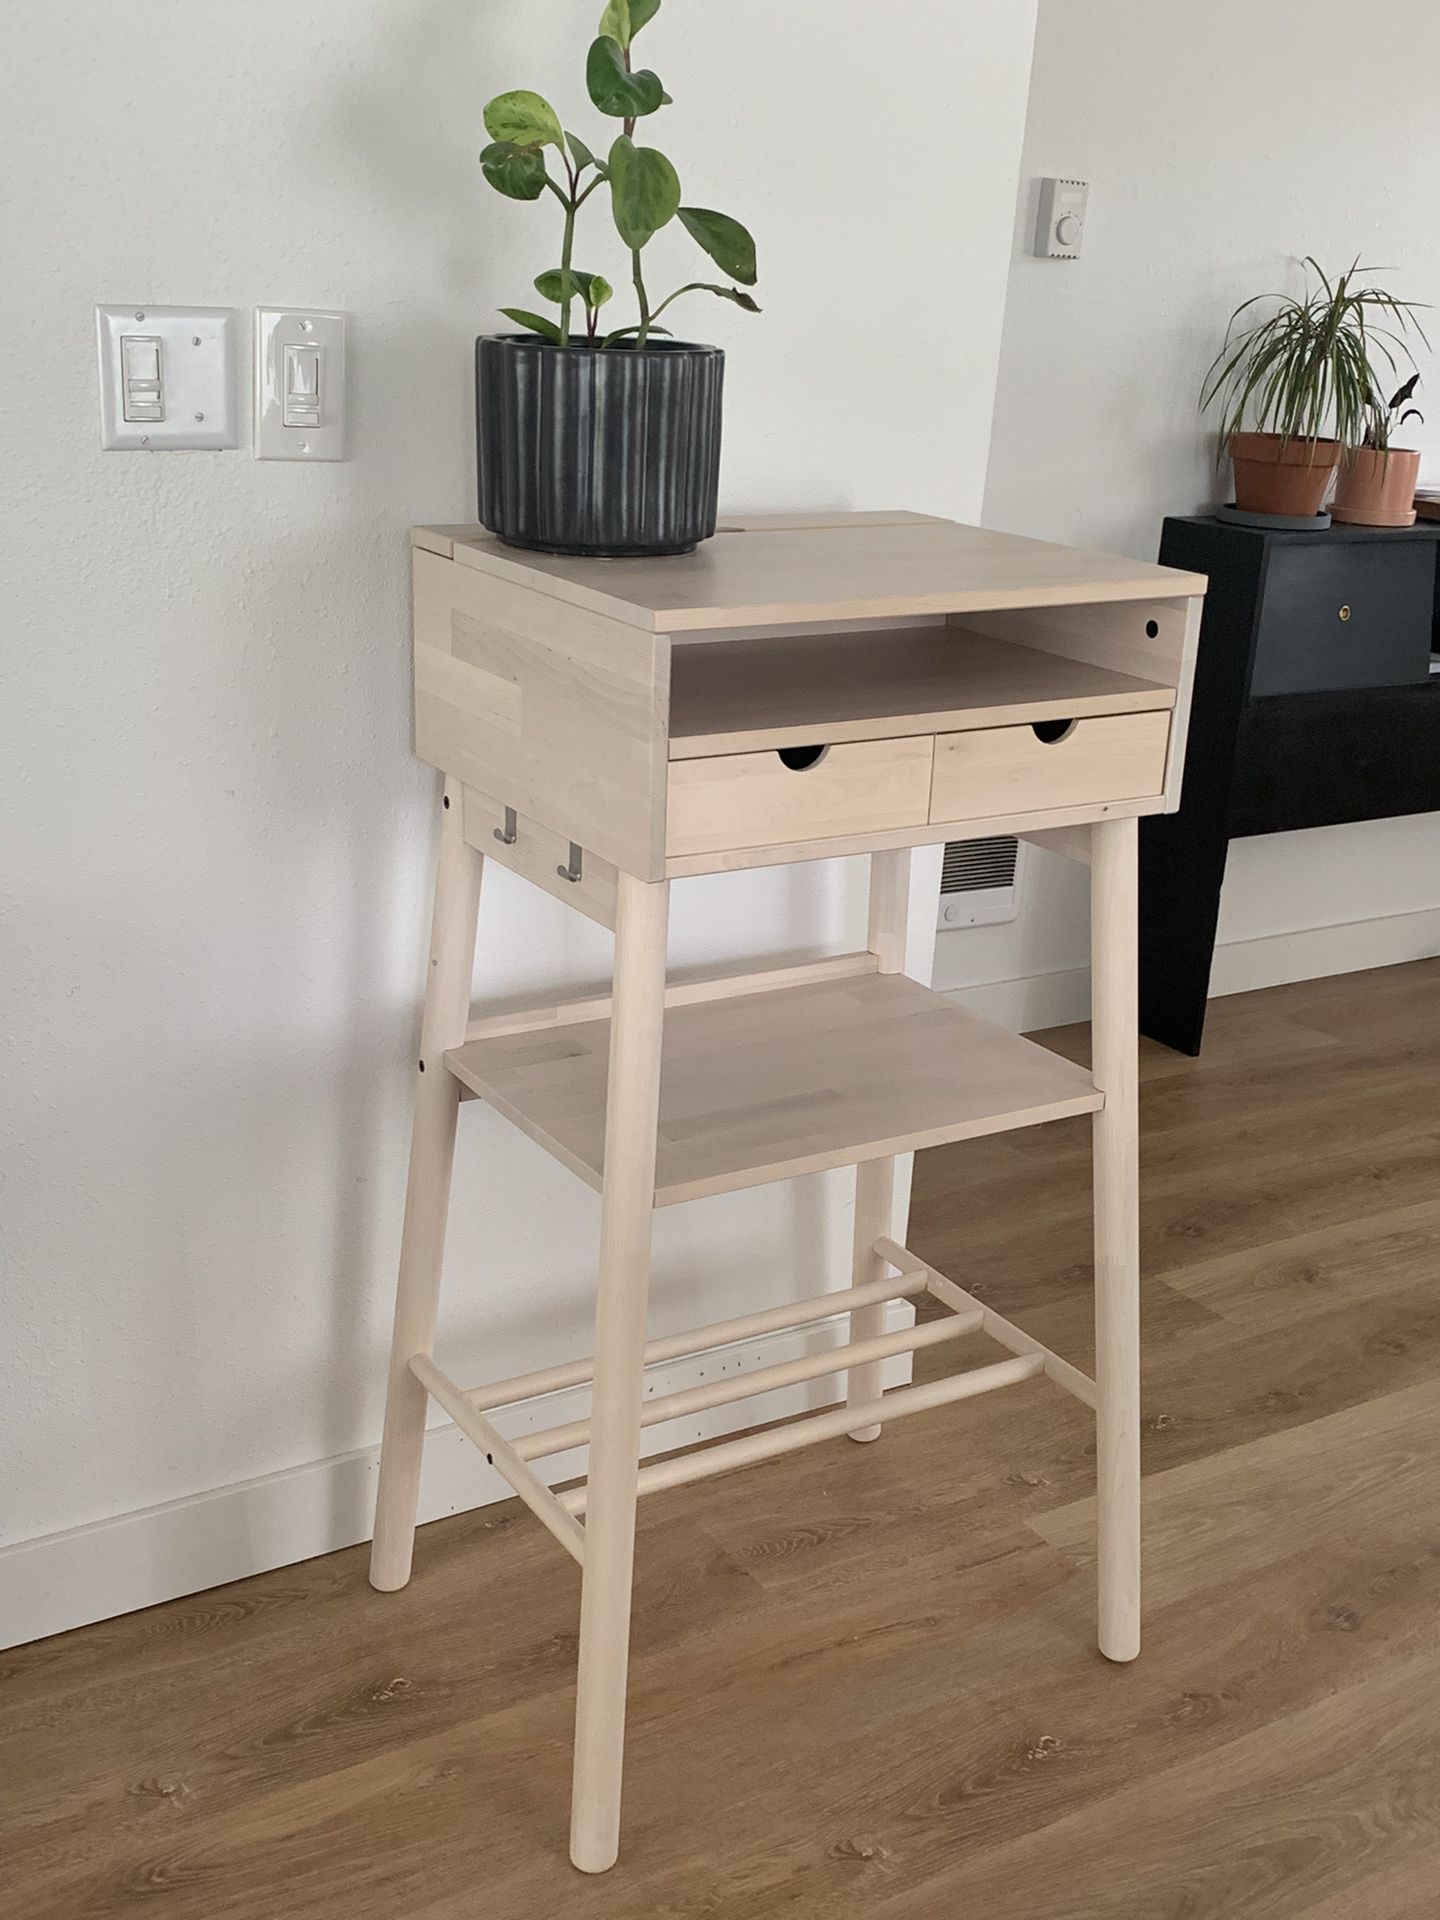 Entry Table / Standing Desk